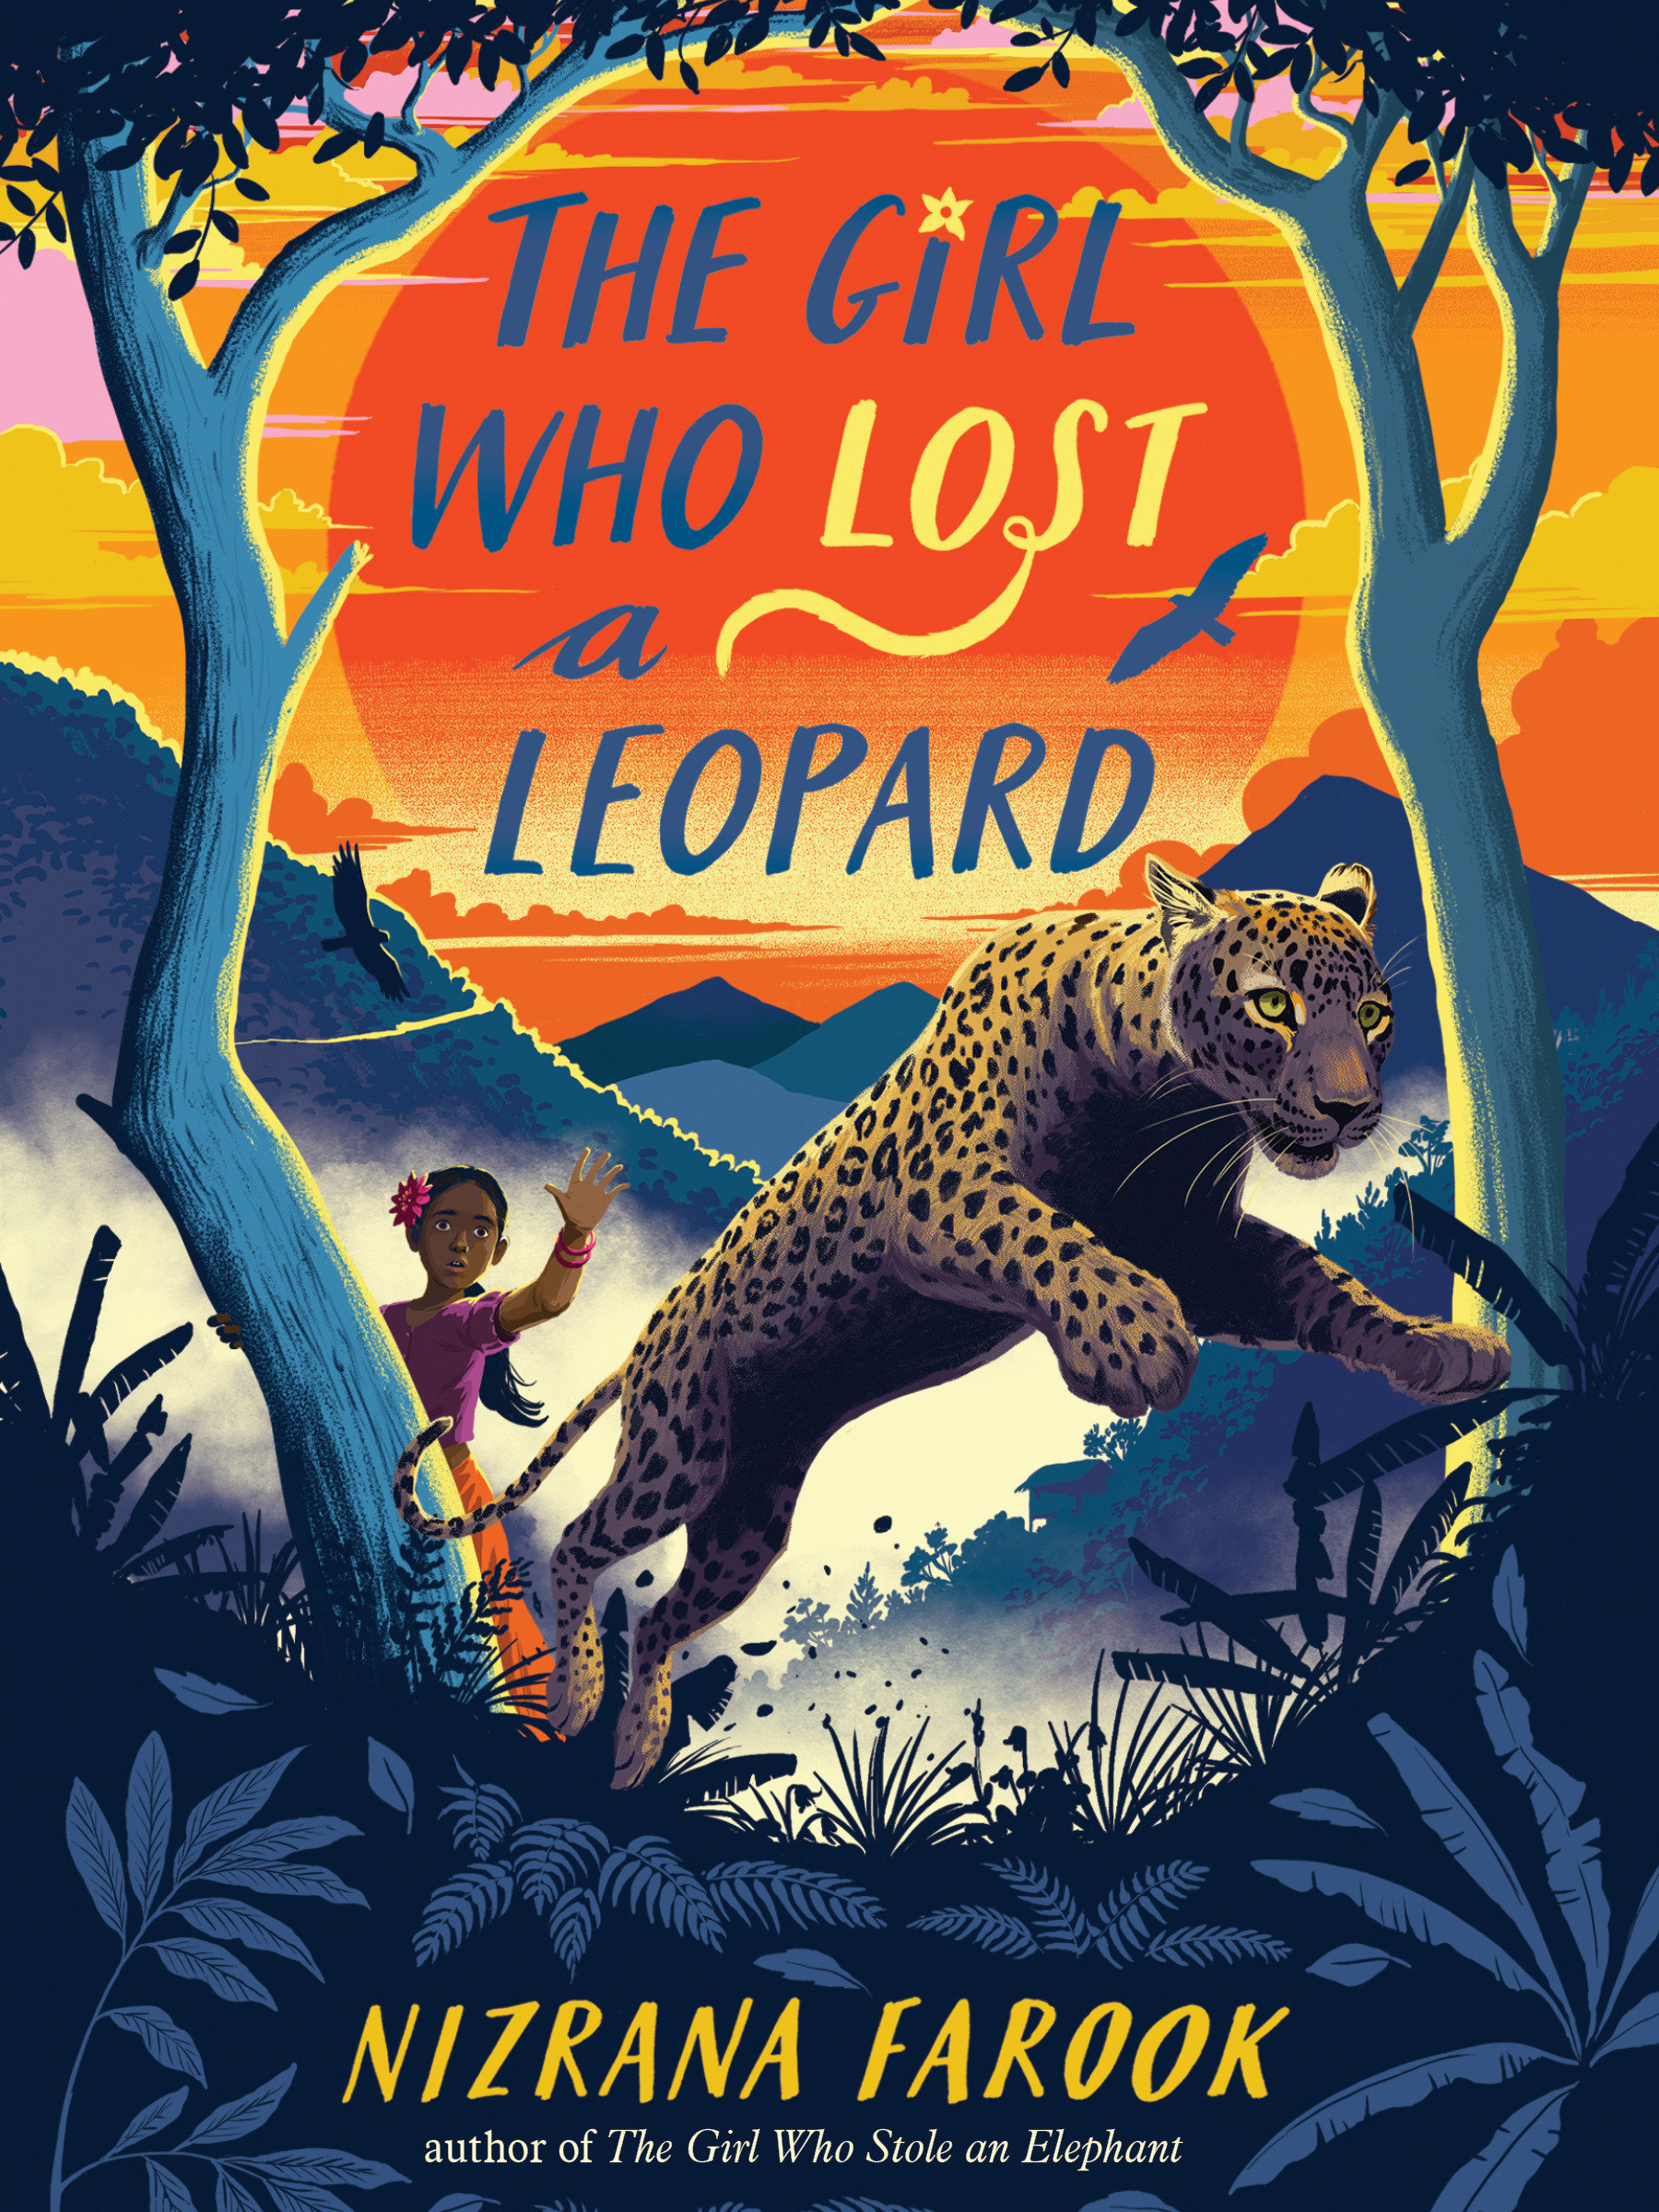 The Girl Who Lost A Leopard (Hardcover Book)